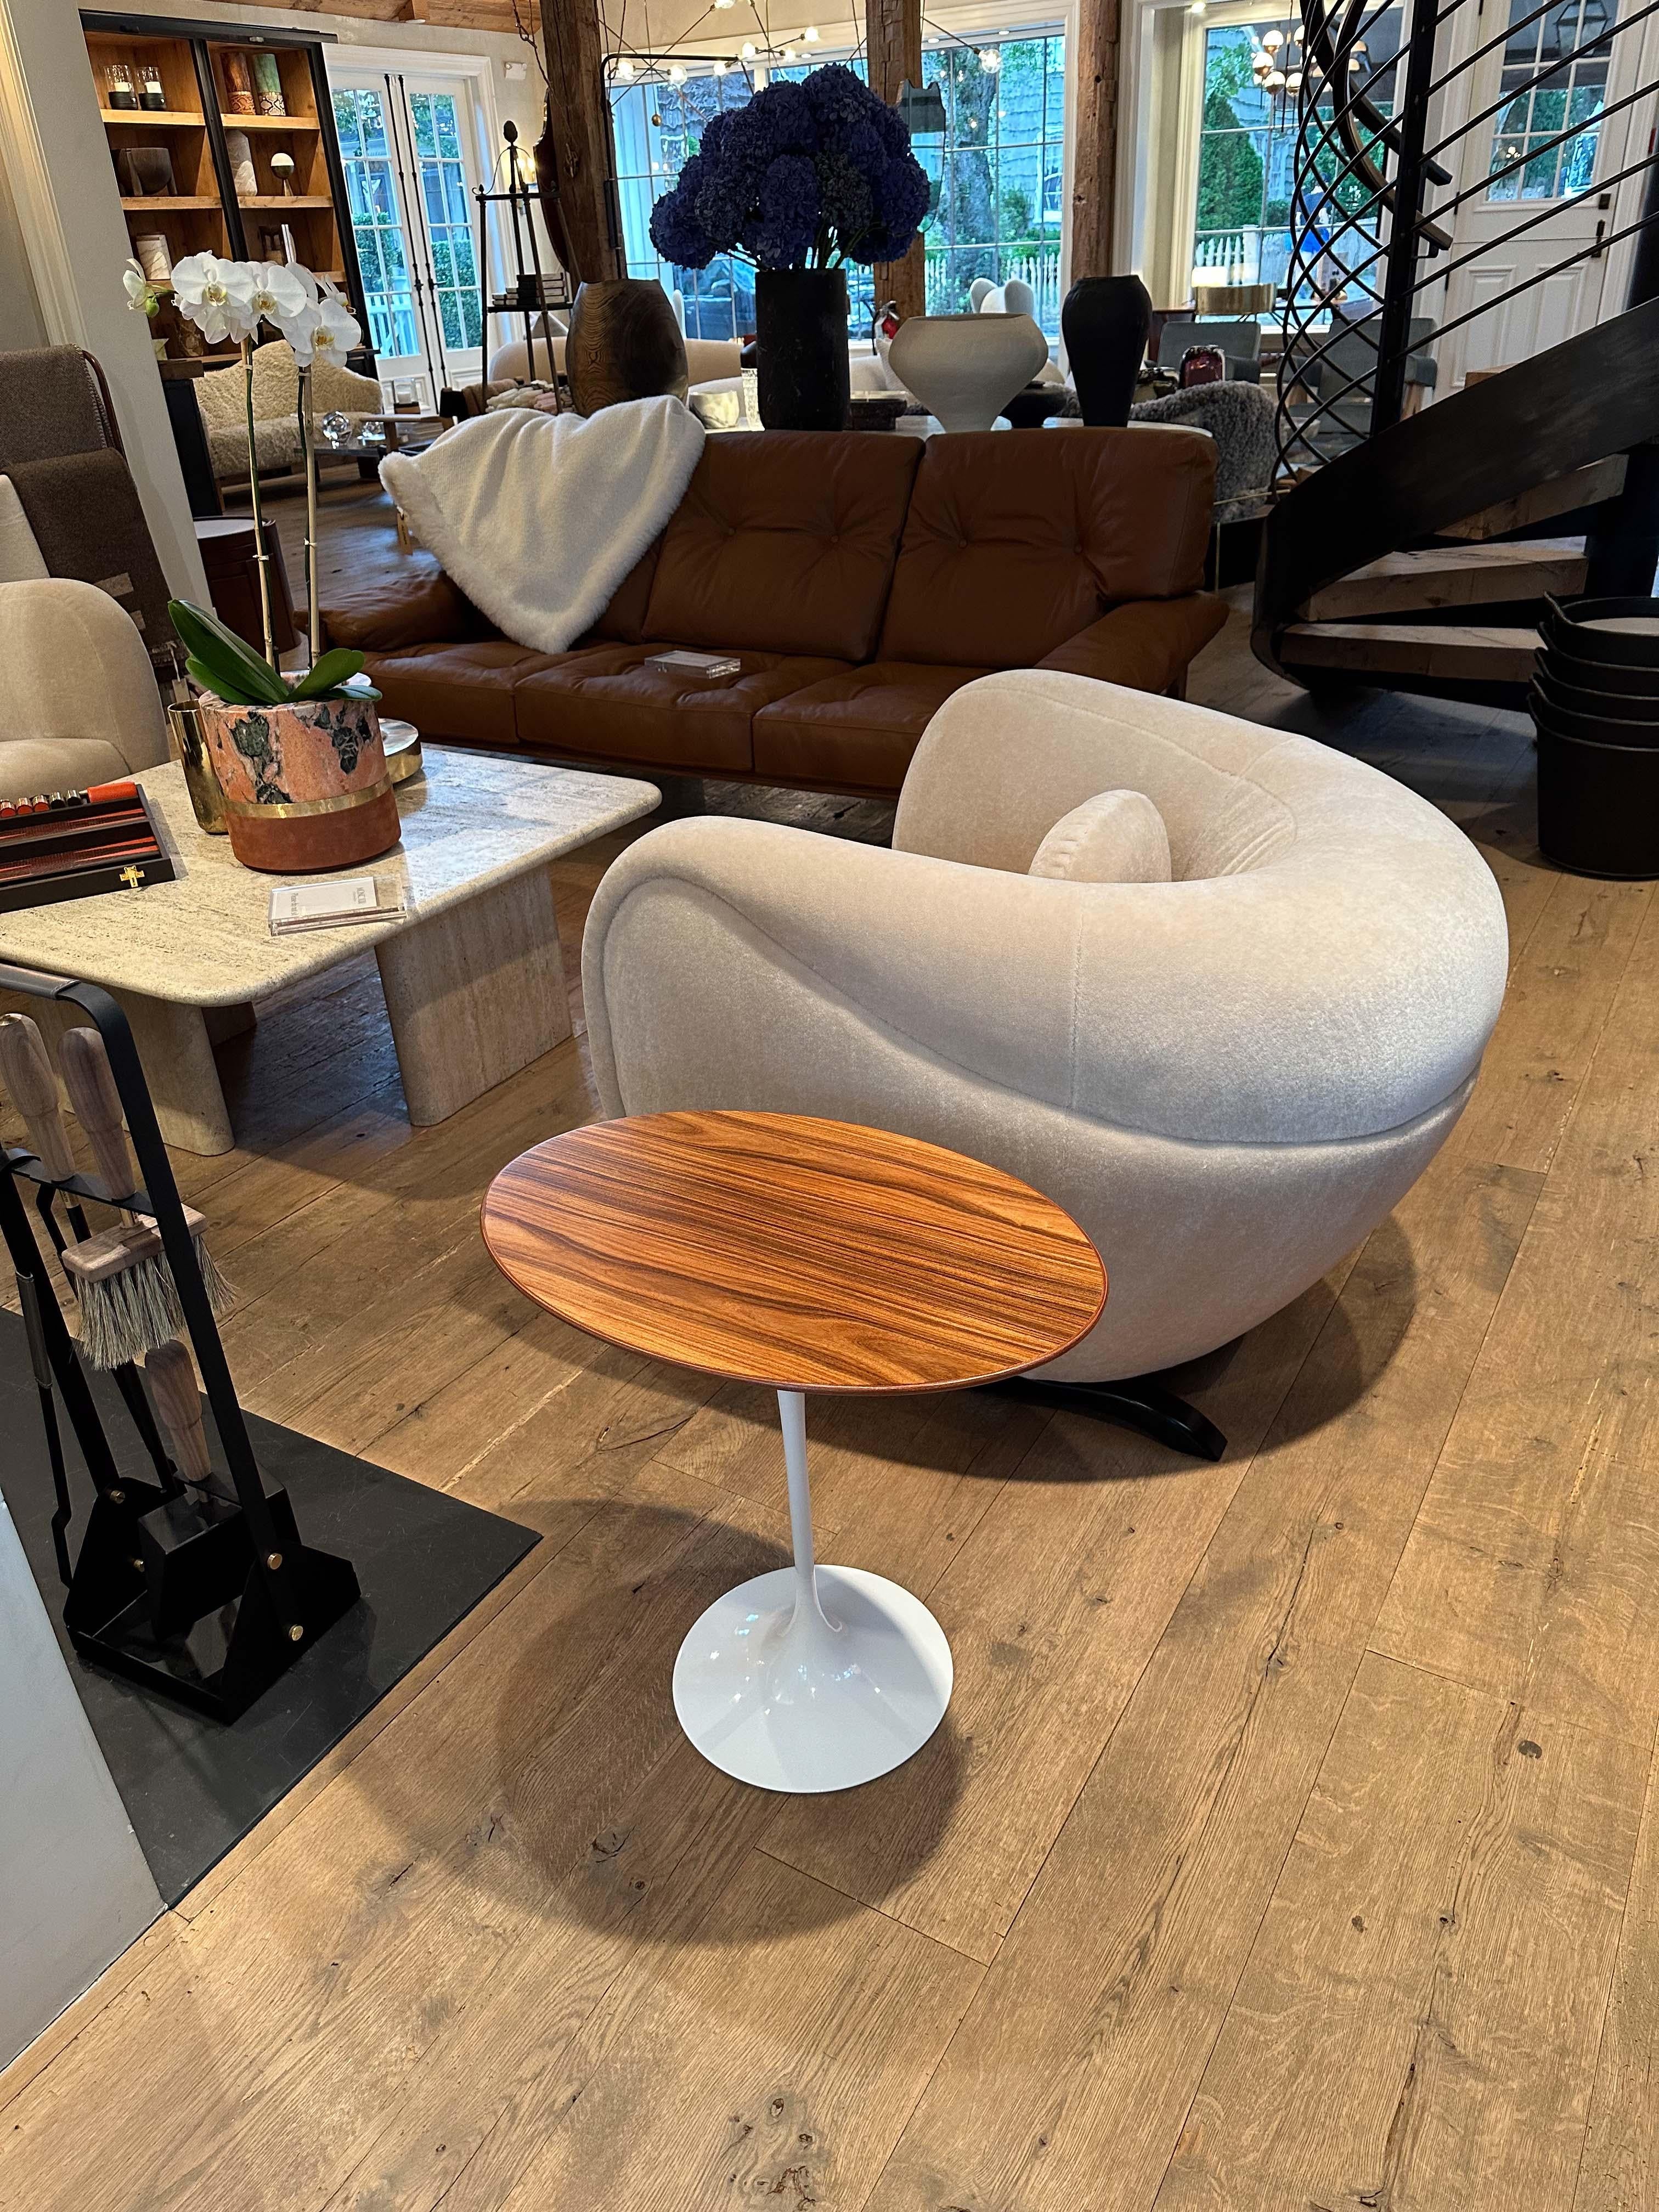 This Eero Saarinen table by Knoll is both strong and stylish, with an oak top and a white base. Its classic, iconic design has graced homes and businesses for decades, and its heavy-duty construction provides durability and reliability.